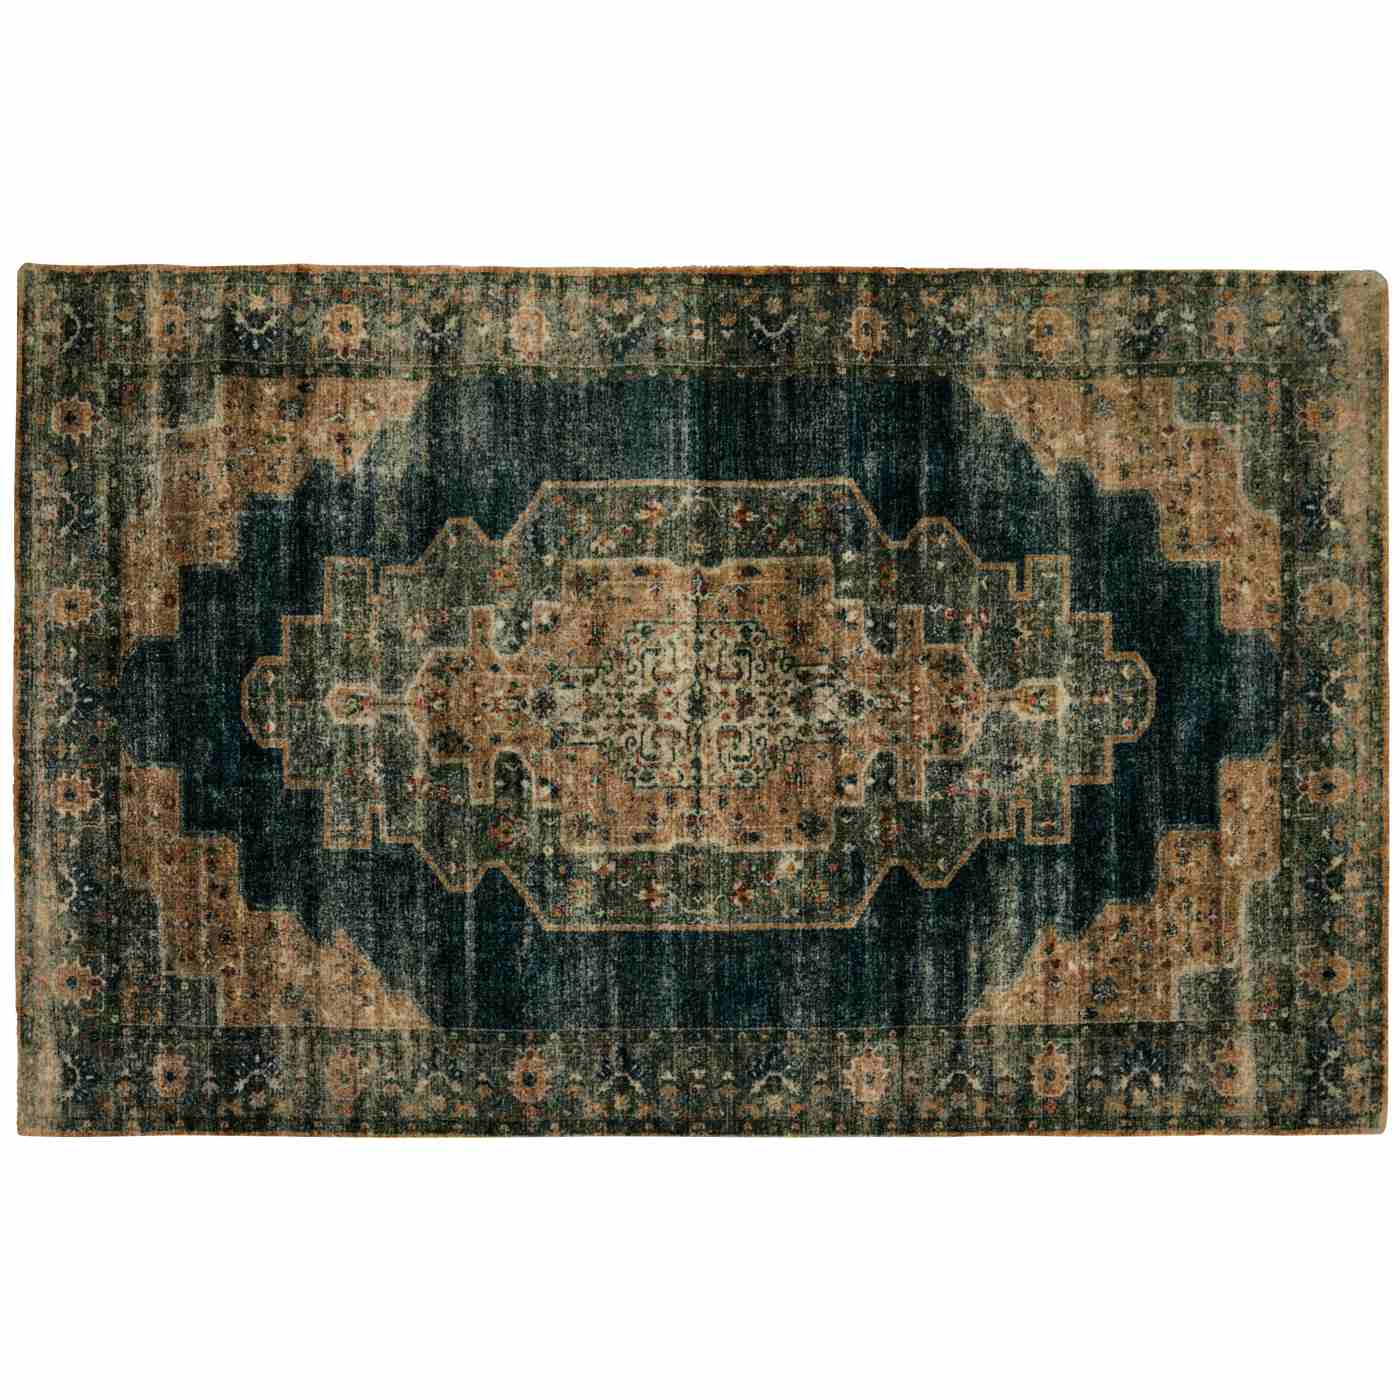 Haven + Key Nylon Accent Rug - Blue & Tan; image 1 of 2